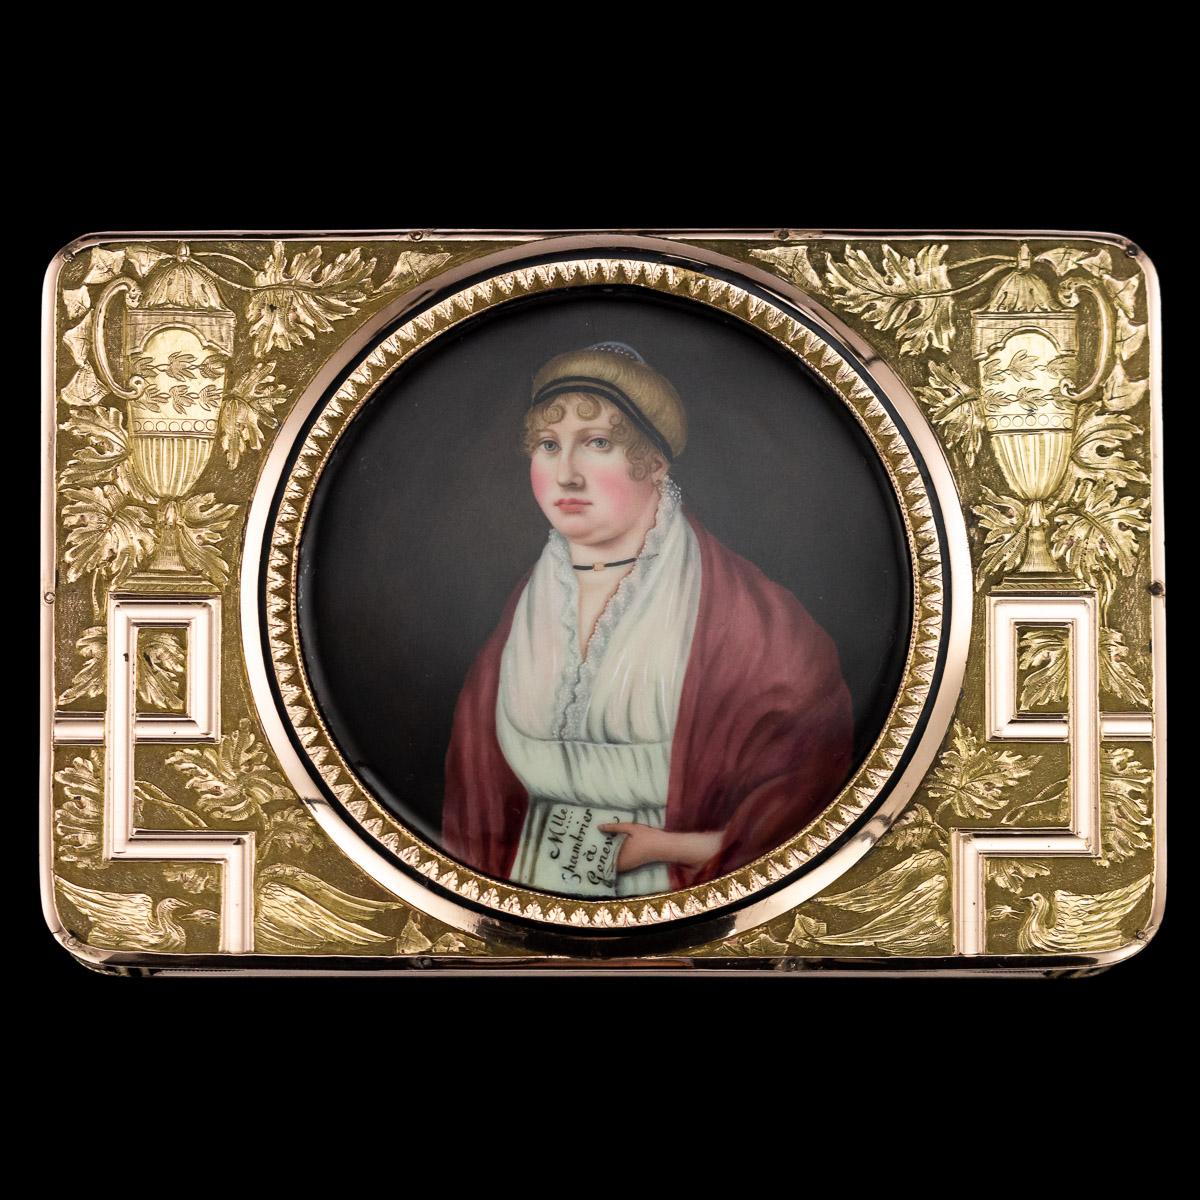 Antique early 19th century Swiss 18-karat solid gold snuff box, of rectangular shape with rounded corners, lid inset with a round hand painted enamel miniature of a Swiss lady, wearing head-dress, translucent embroidered gown, holding a letter